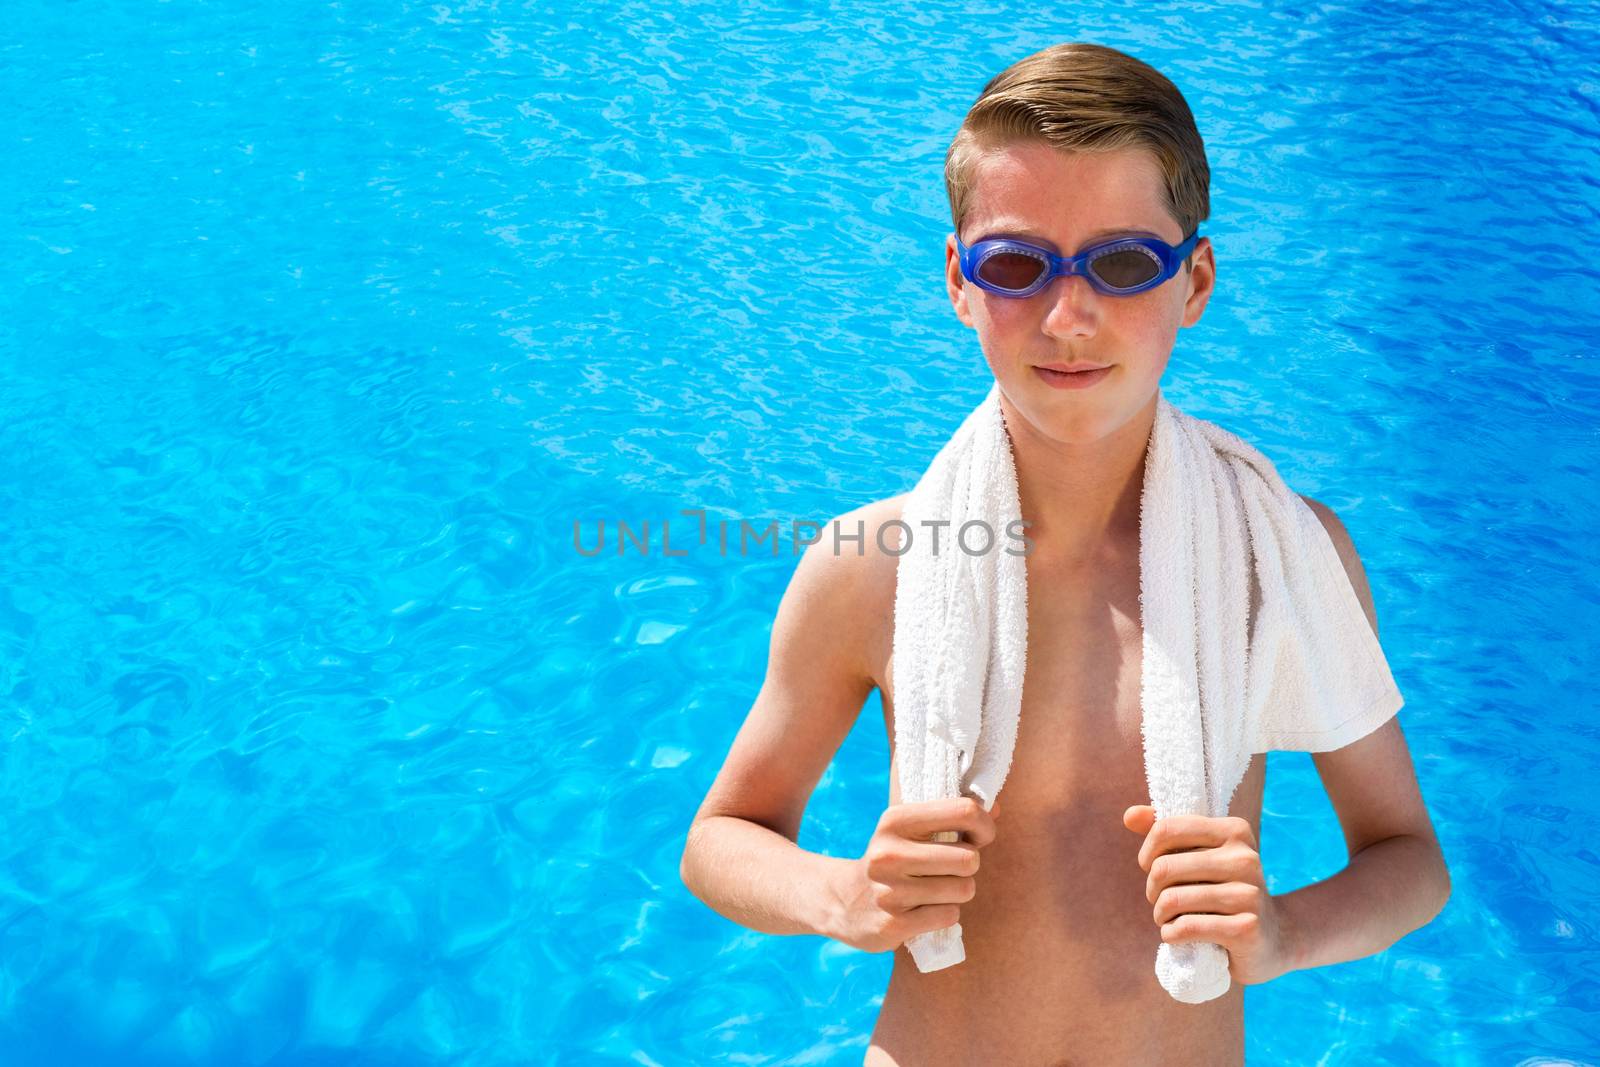 Dutch teenage boy wearing swimming goggles and towel at swimming by BenSchonewille